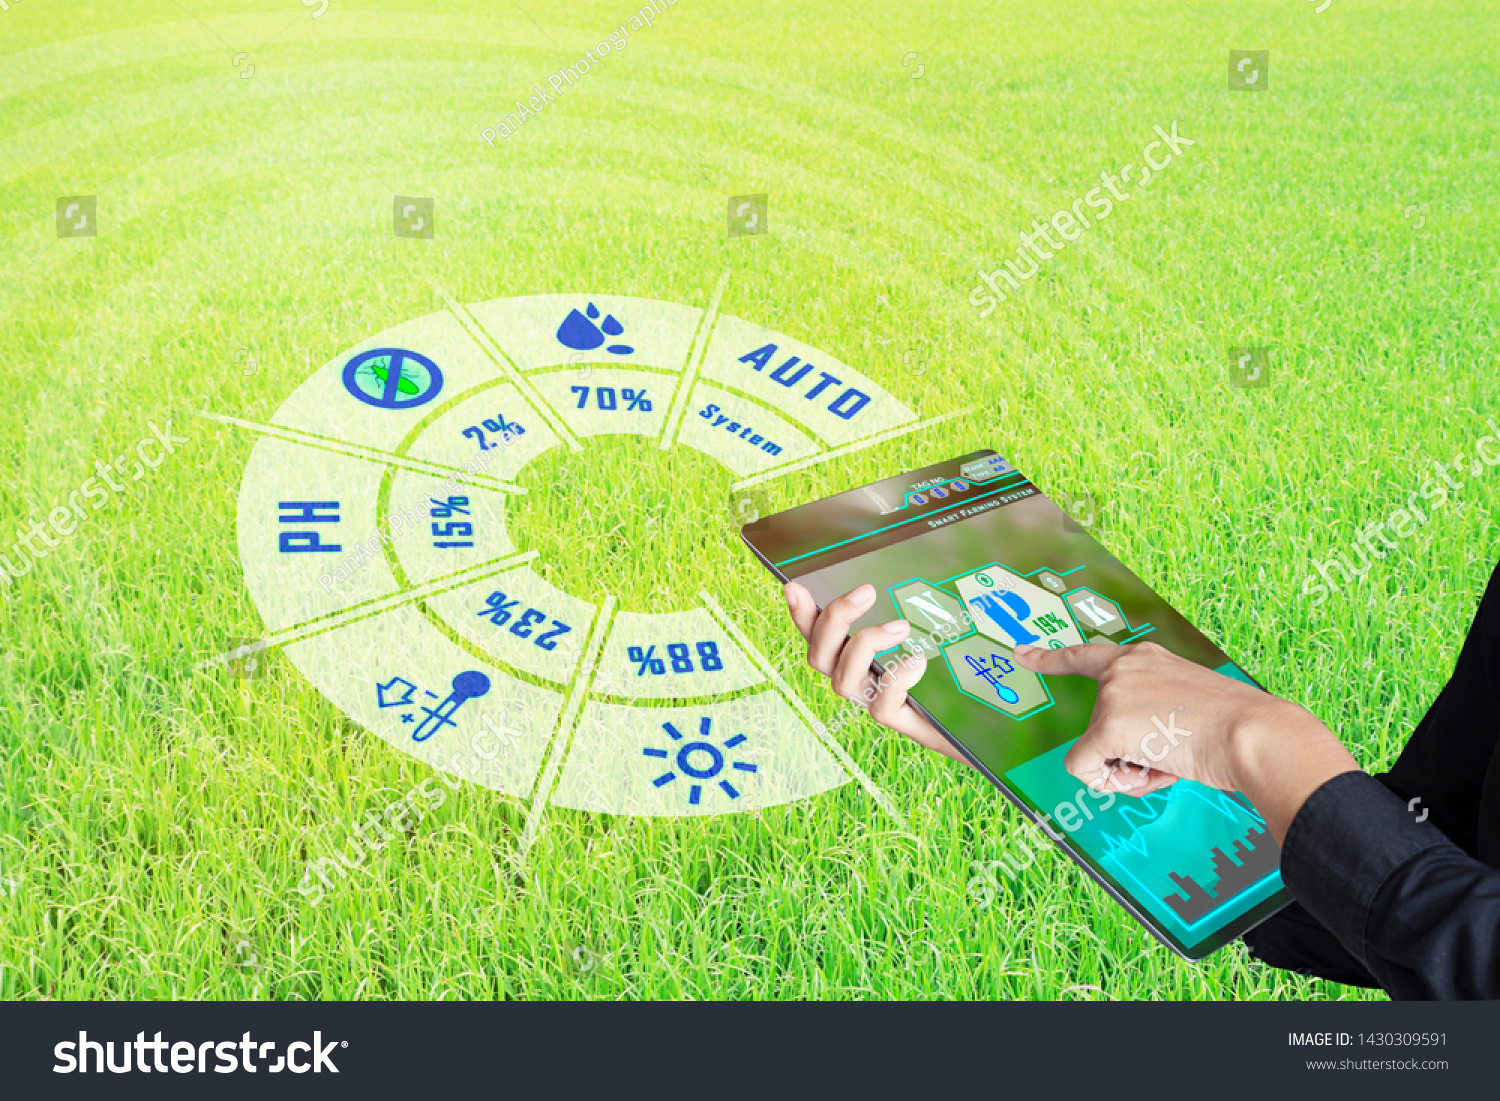 Smart farming with IoT, futuristic agriculture concept : Business woman monitoring all Farm status and situation control with smart device, analysis and report with immersive experience on holographic #1430309591